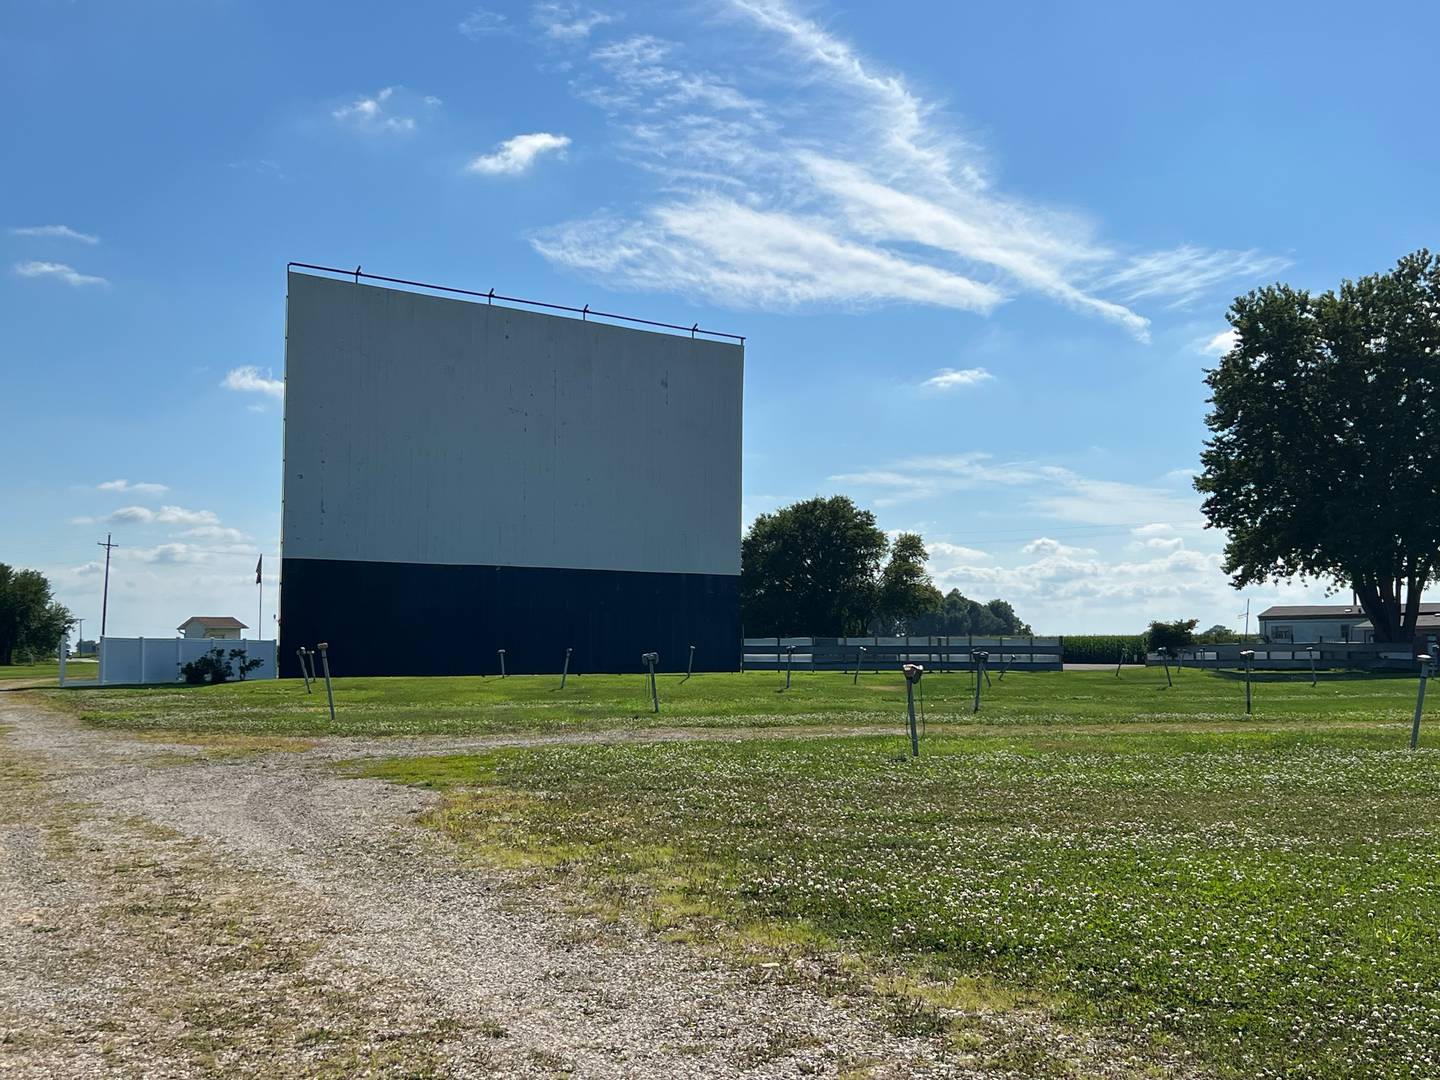 The Route 34 Drive-In in Earlville will be open every Friday, Saturday, Sunday through the end of October.